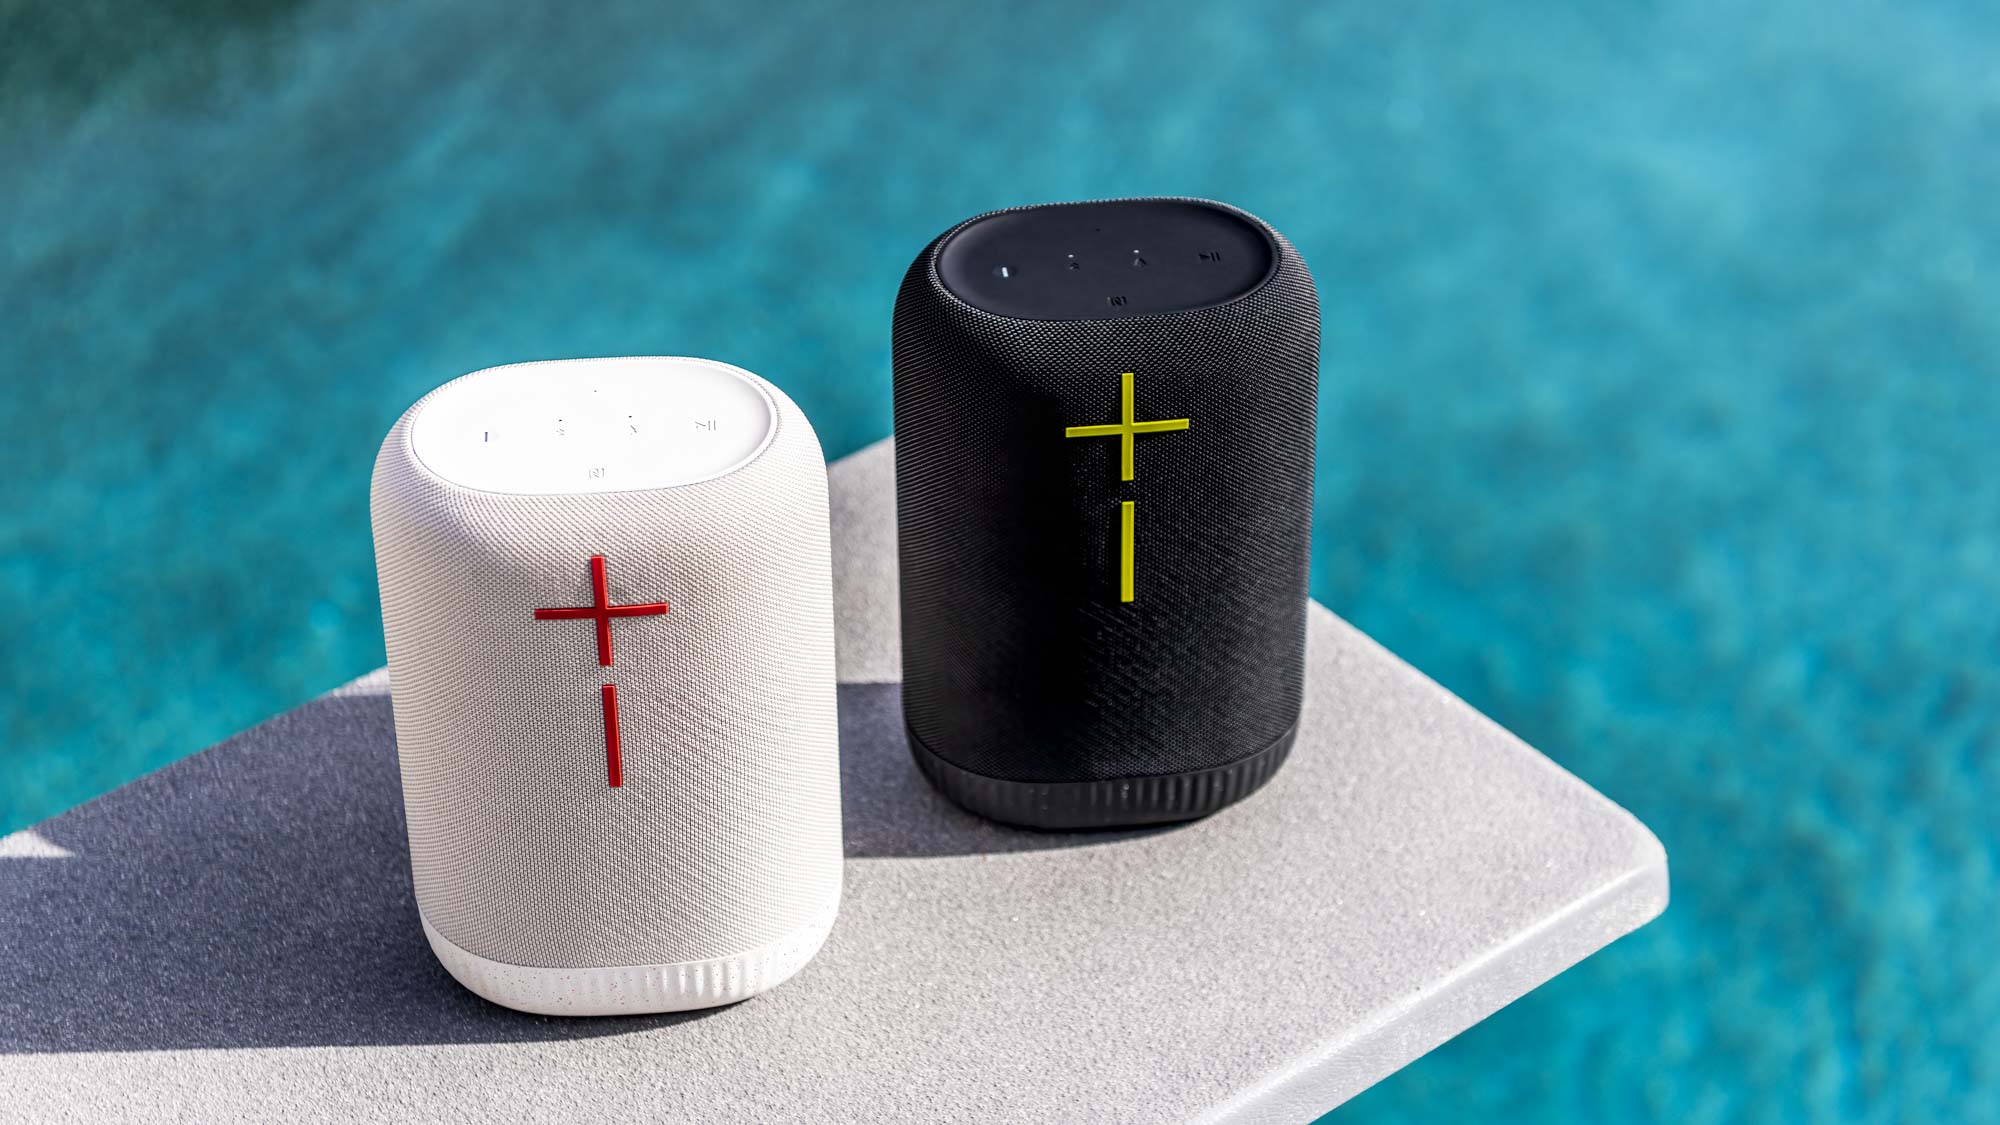 Connecting A Waterproof Boom Speaker To Your IPhone: Step-by-Step Guide